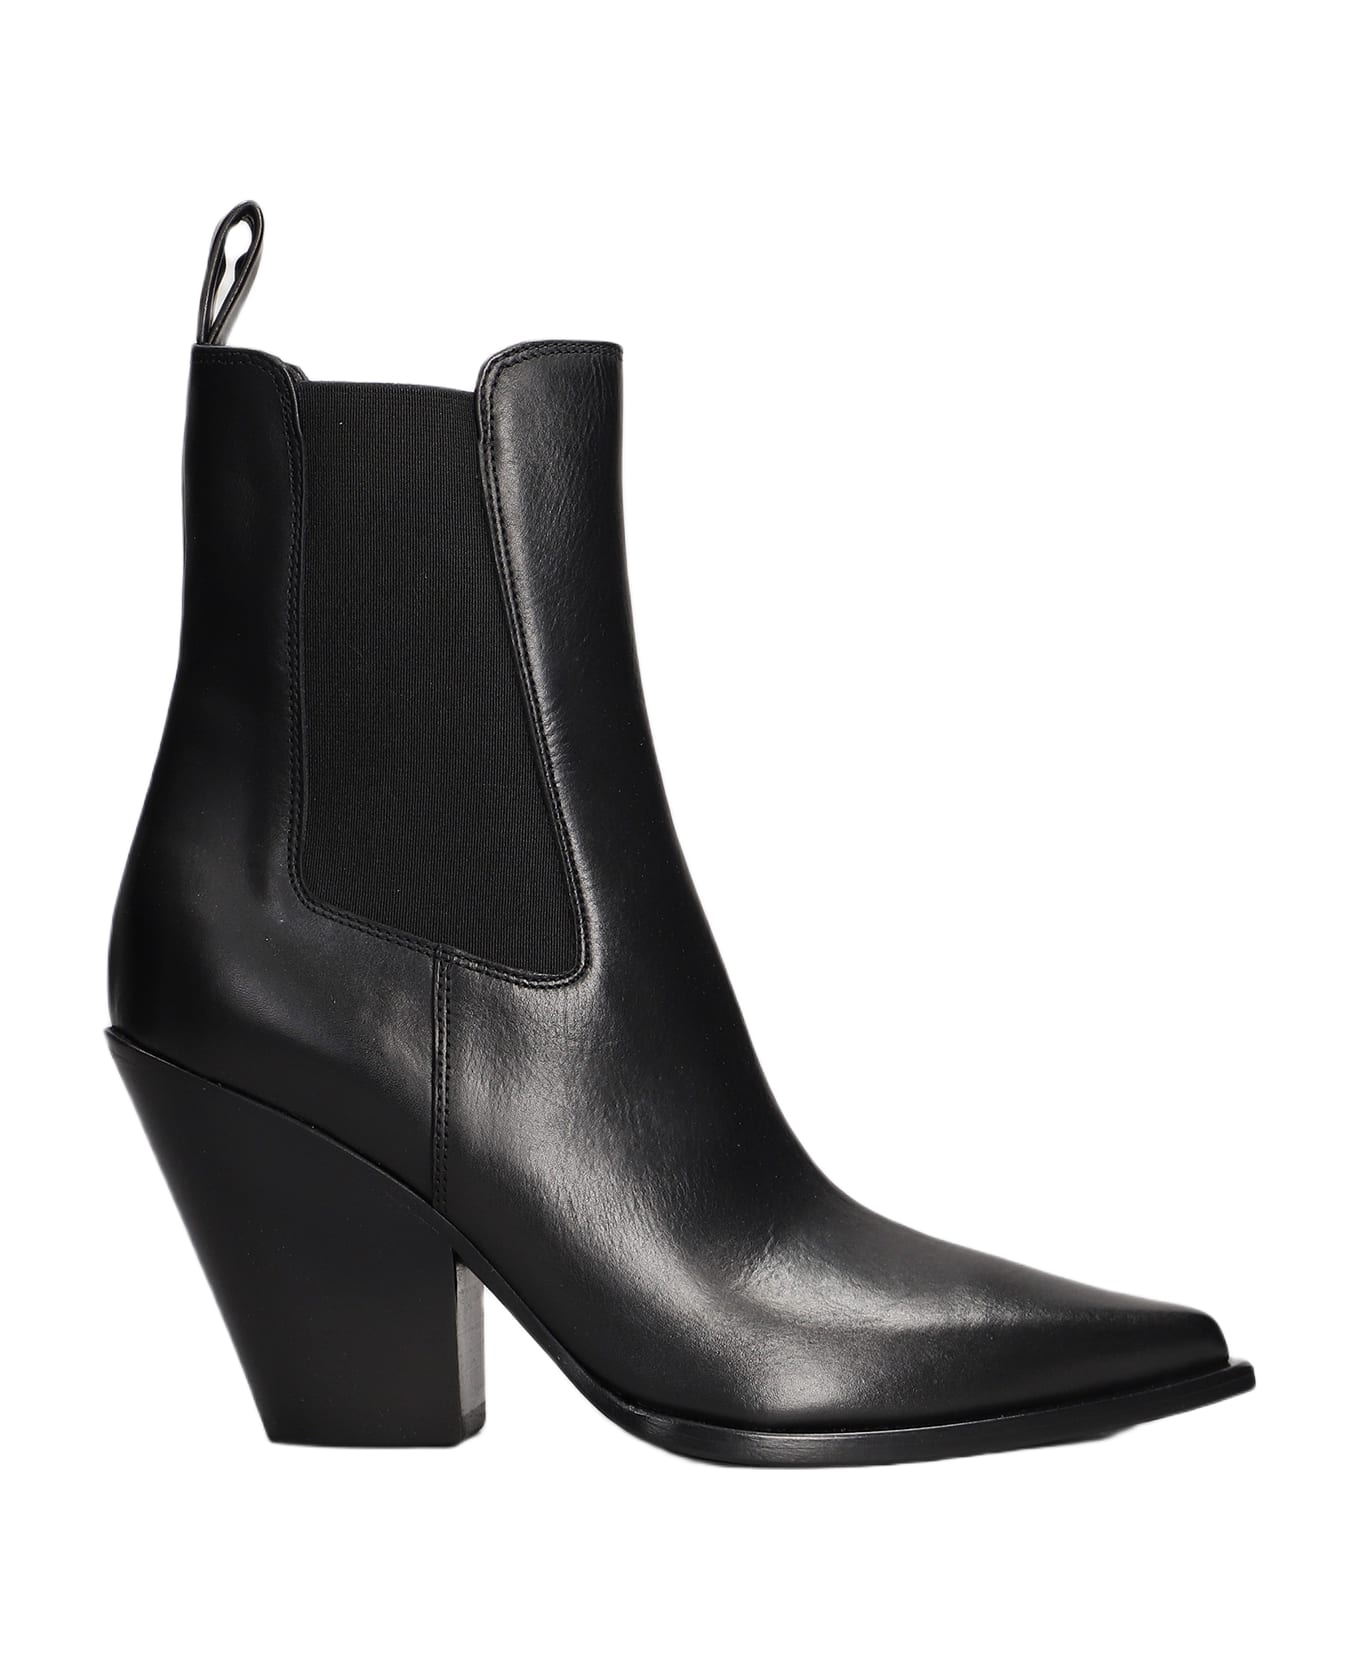 Elena Iachi Texan Ankle Boots In Black Leather - black